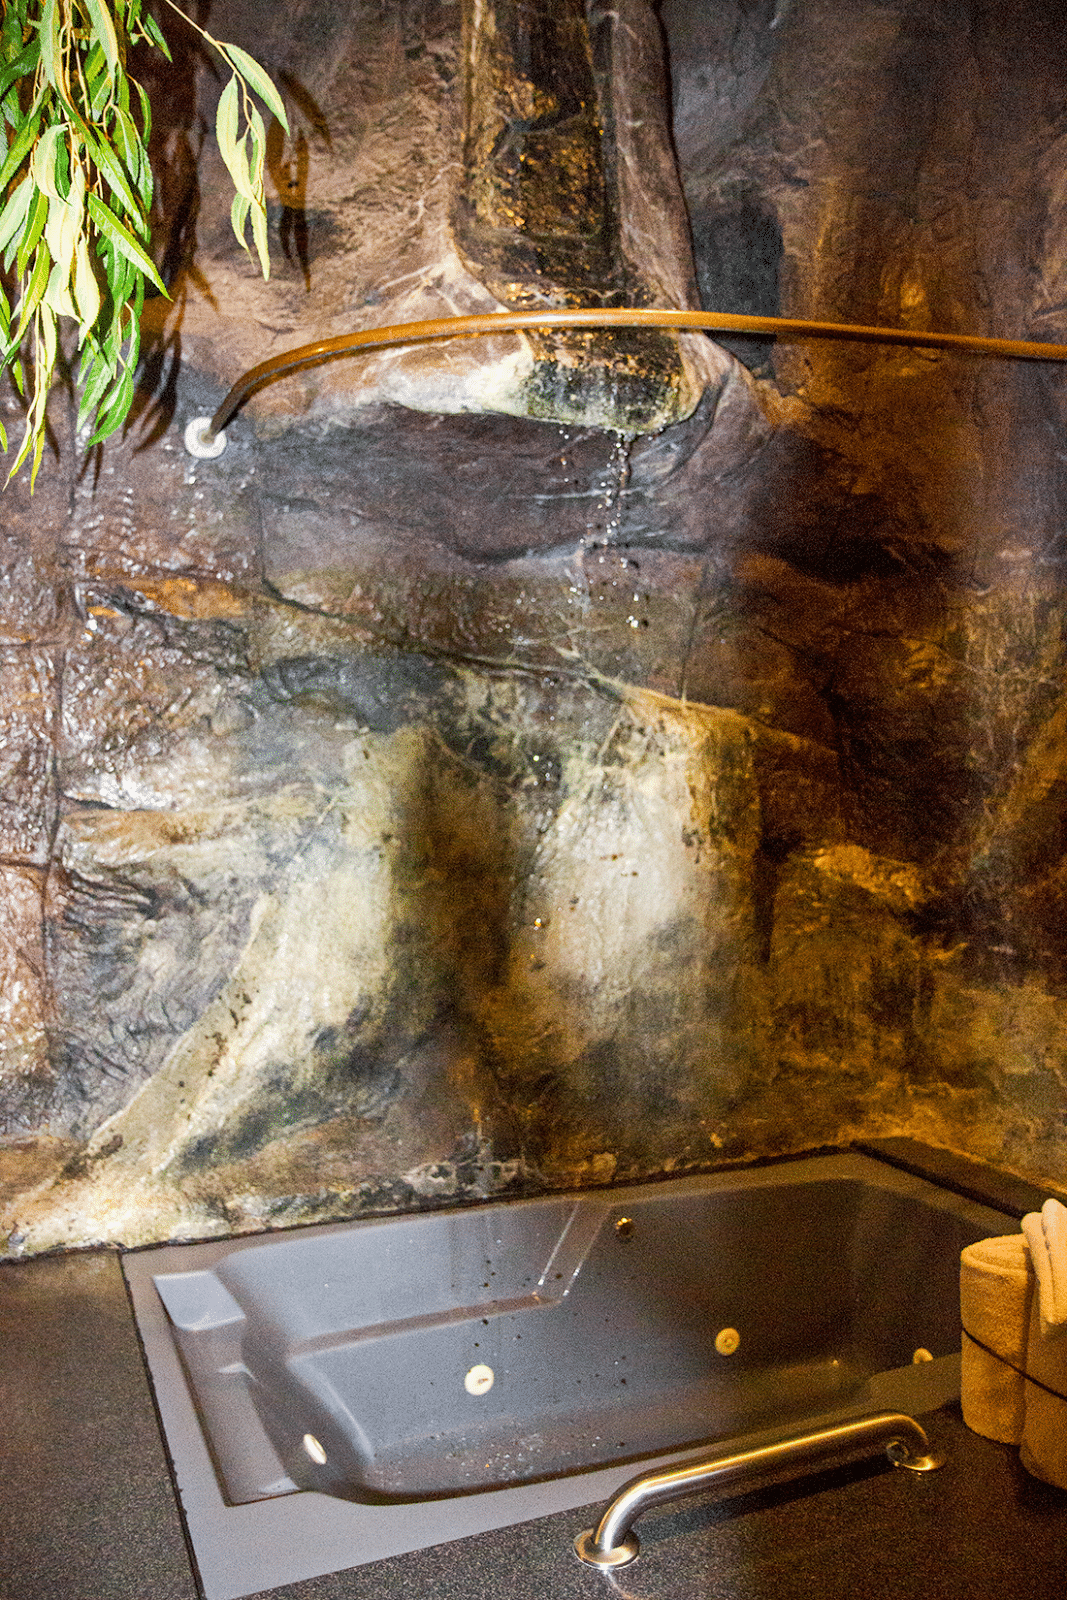 Waterfall jetted tub at the Swiss Family Robinson Room at the Anniversary Inn. 